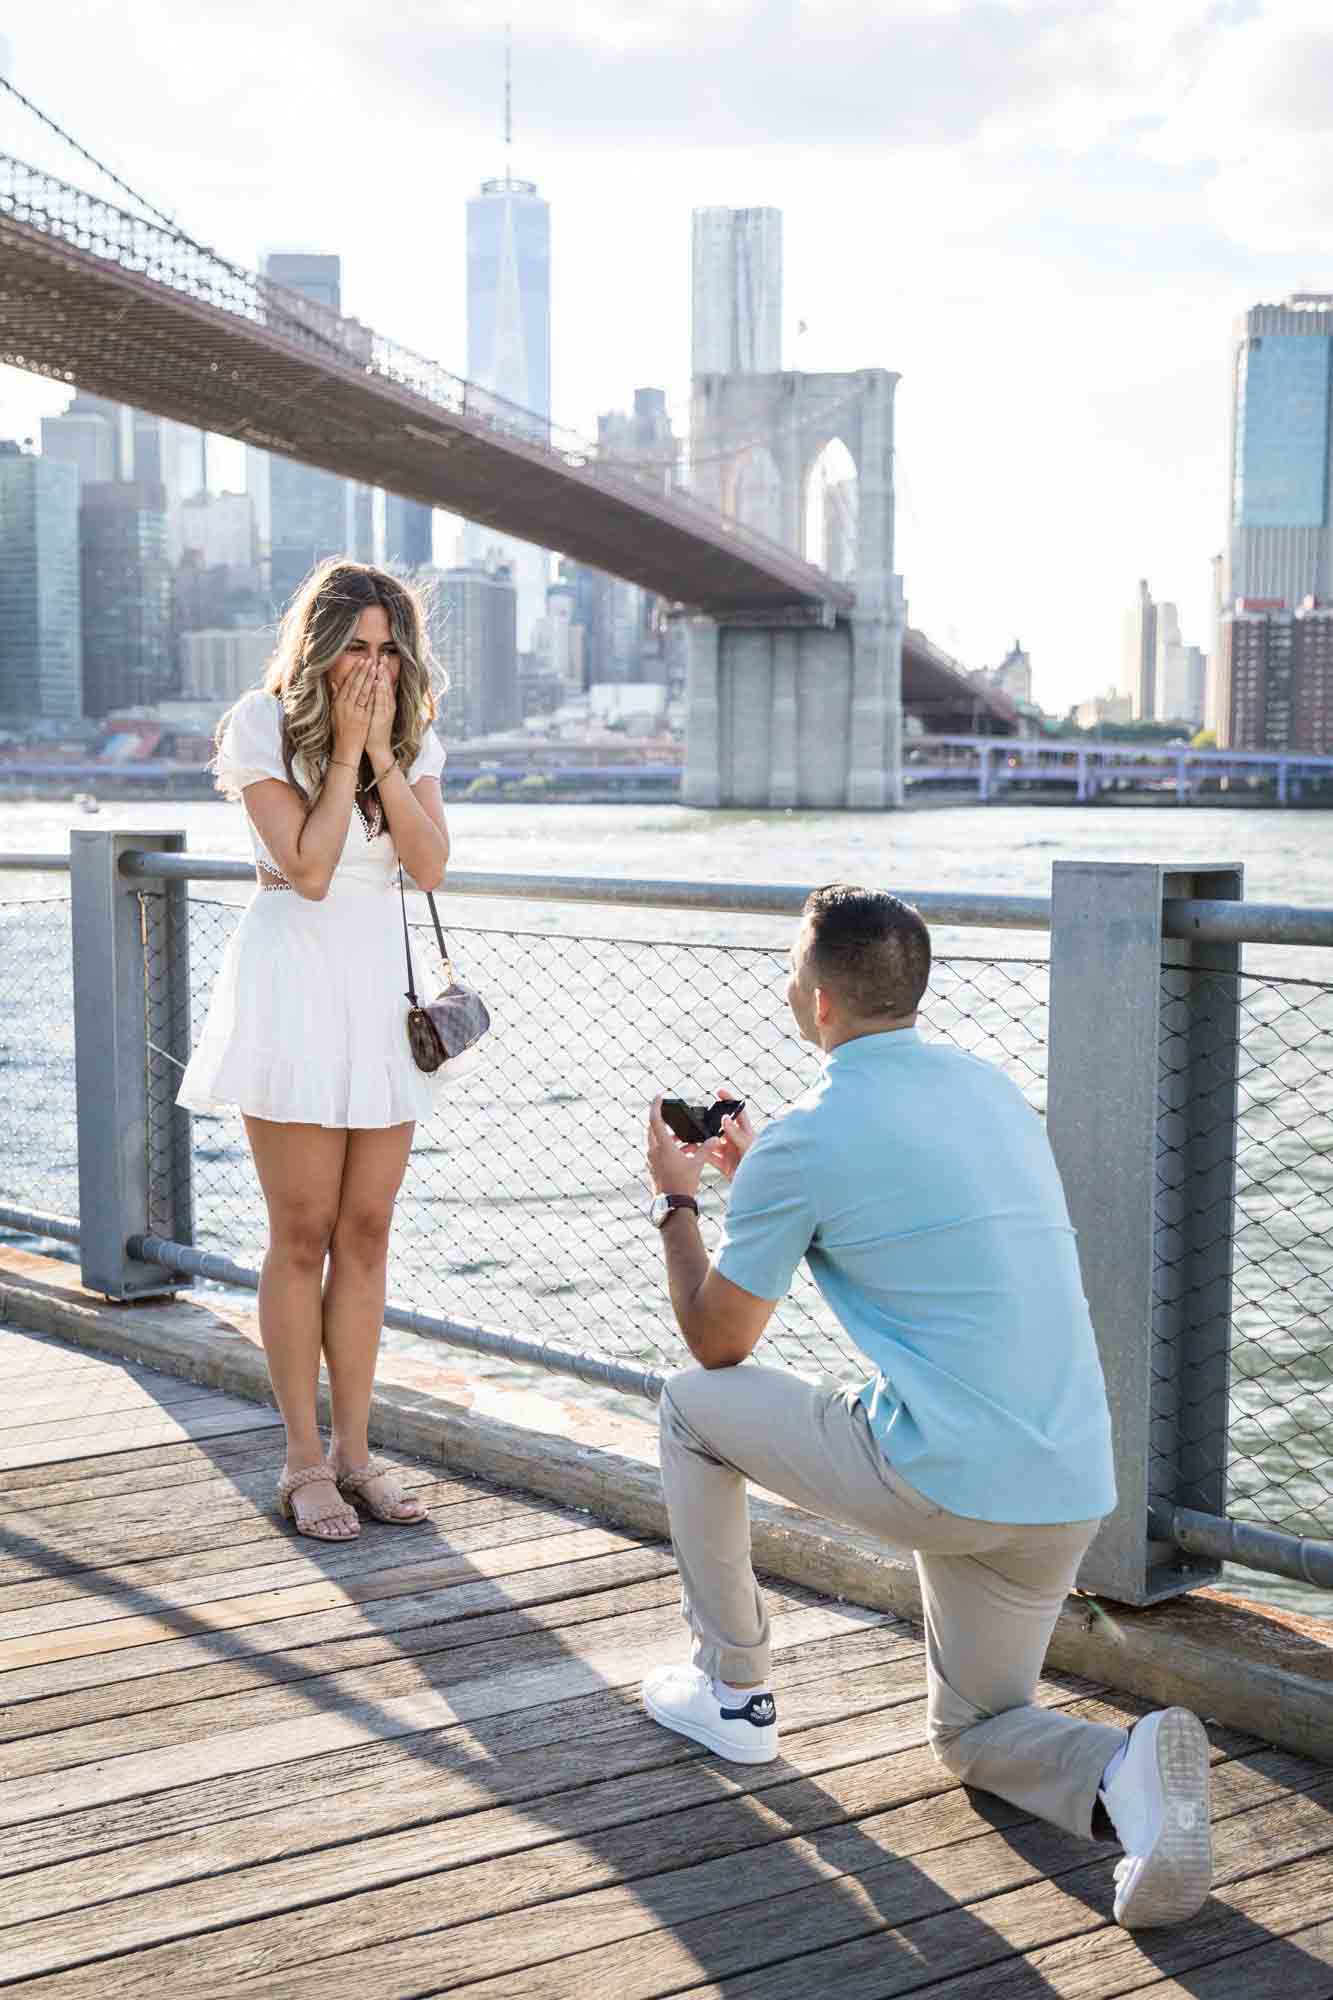 Man on bended knee proposing to woman on boardwalk during a Brooklyn Bridge Park surprise proposal